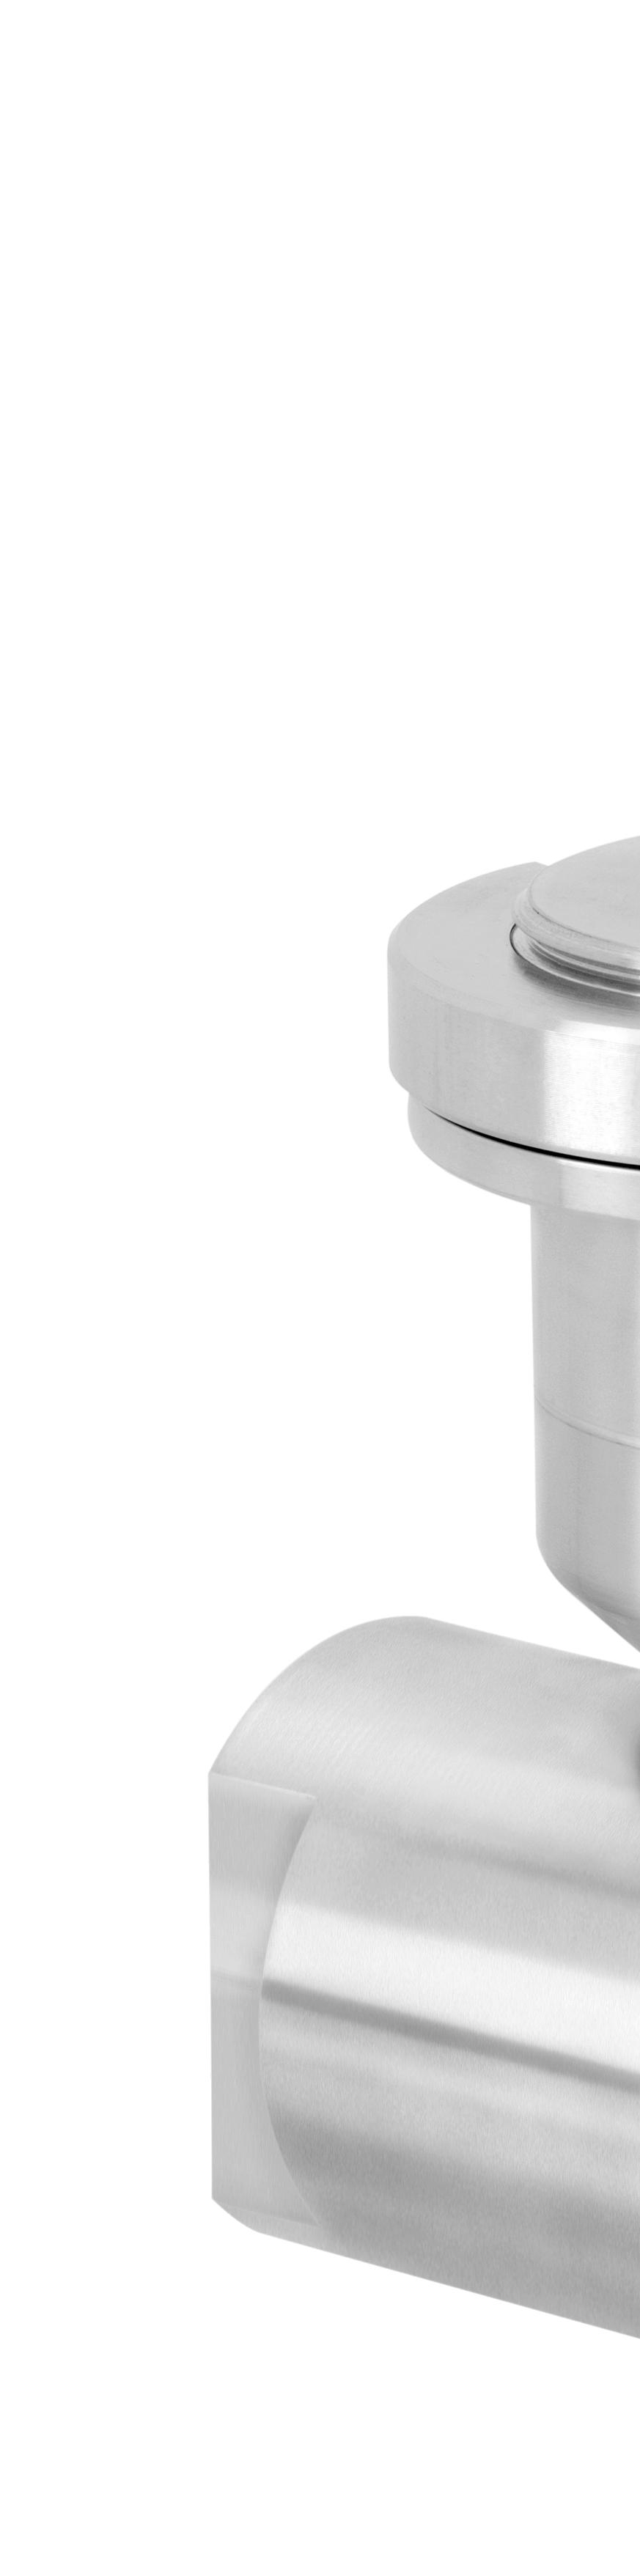 10 Customized Pressure Sensors and Components The solution for differential pressure applications: customized pressure transducer UTD20 Hydrostatic level measurement in pressurized tanks requires a